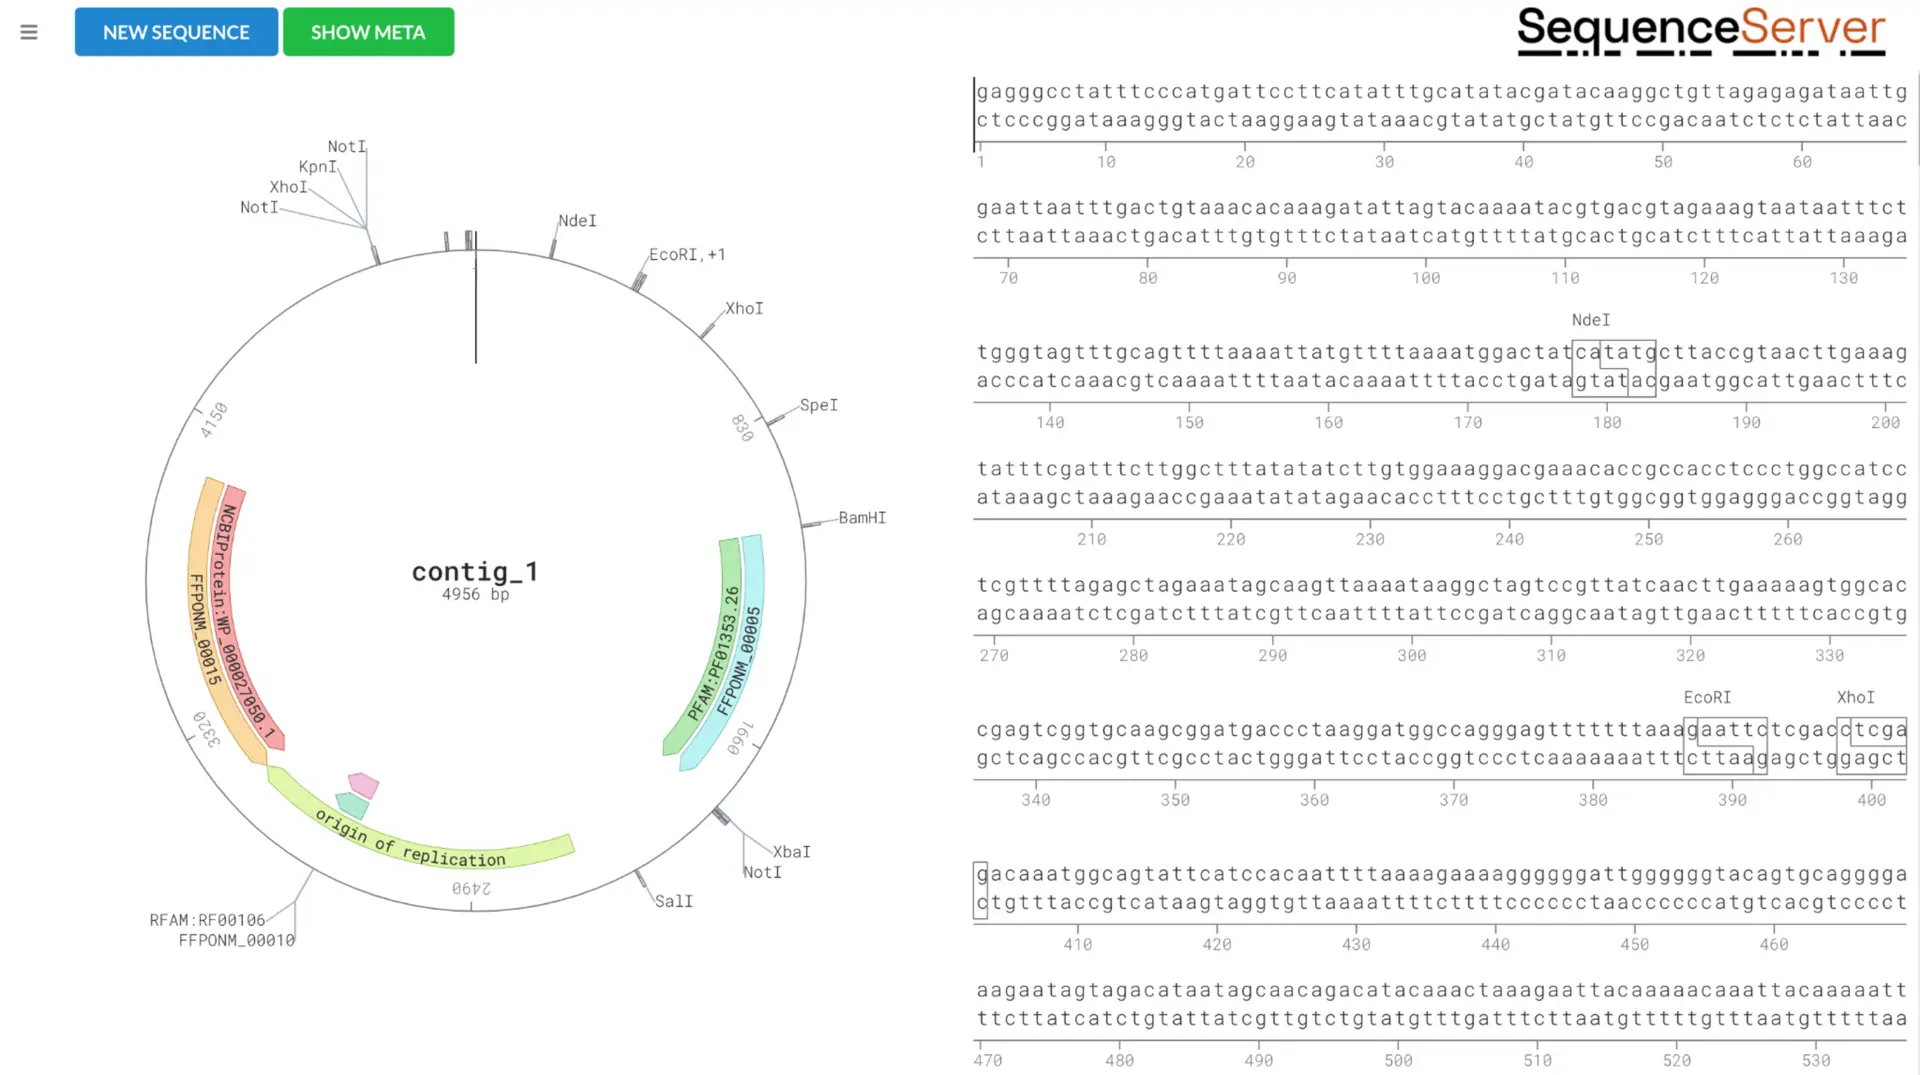 SeqeunceServer DNA Visualizer is great for plasmid annotation, showing different features like genes, restrection enzyme sites and more!